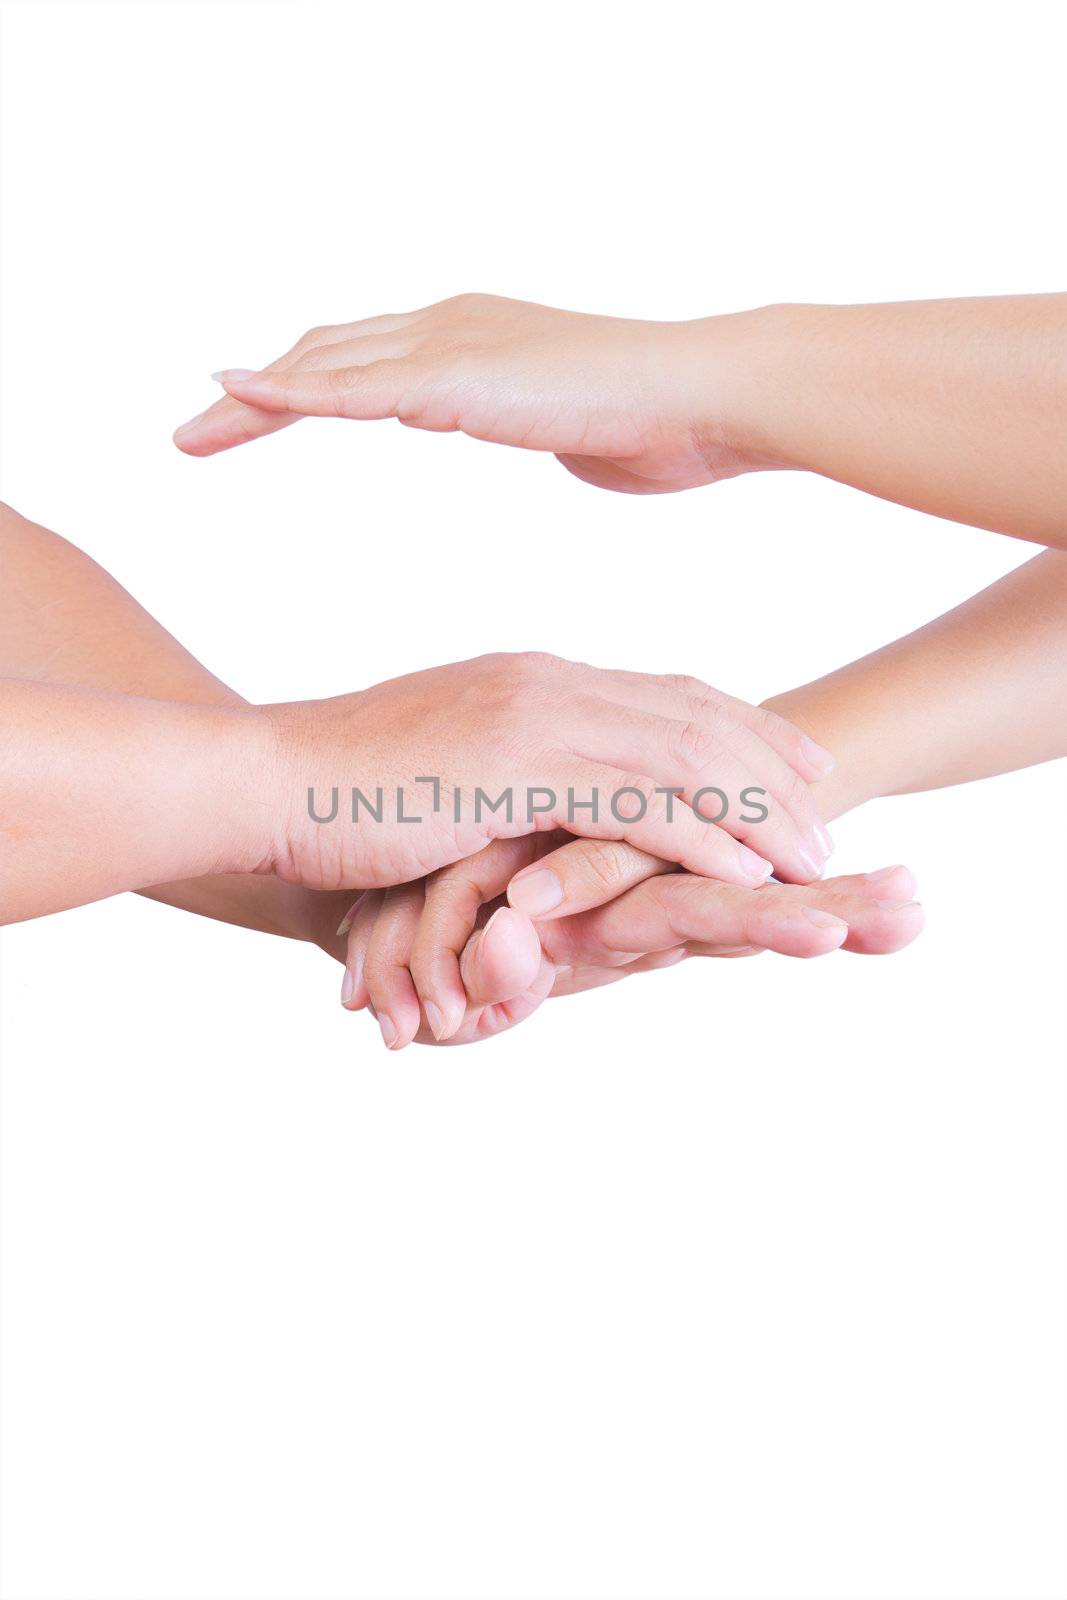 man and womam holding hands isolated on white background